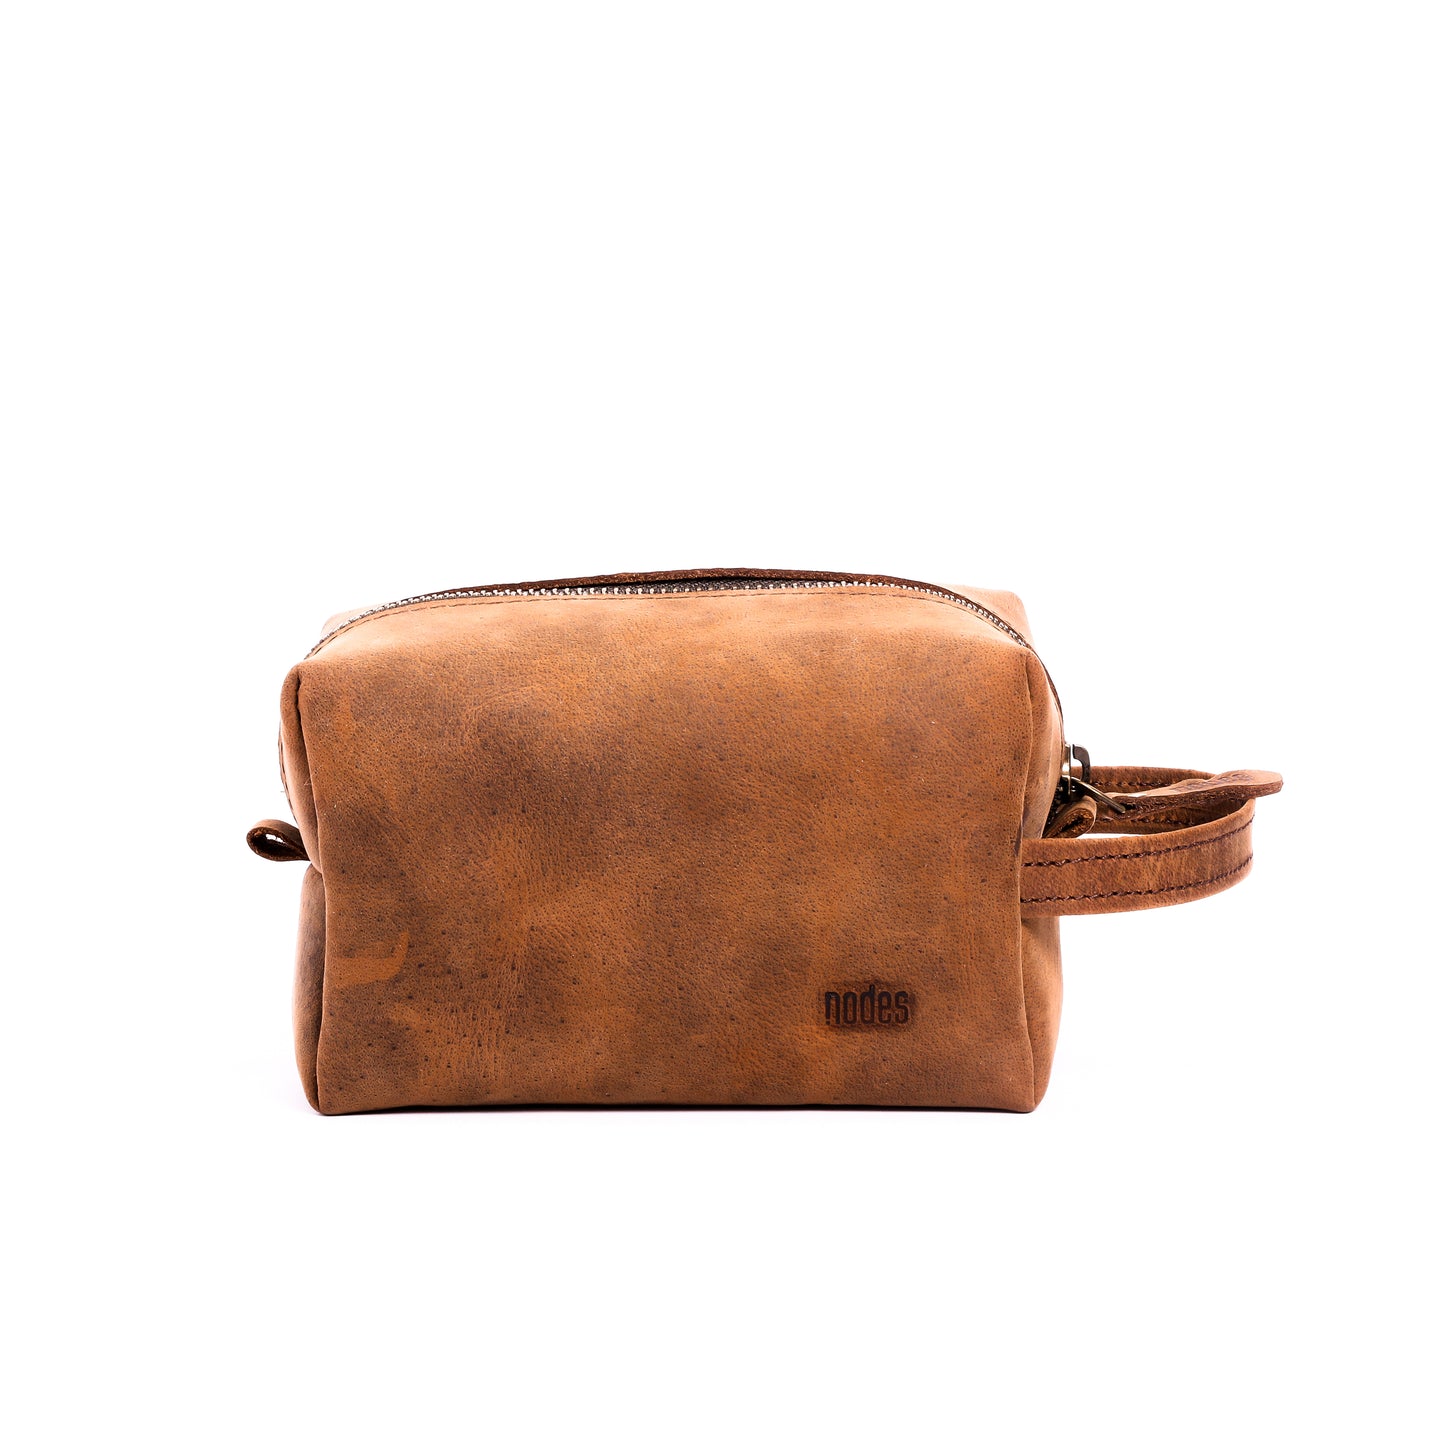 a brown leather toiletry pouch with one big compartment with zipper for travel needs , travel pouch, vanity pouch, leather bag, Genuine leather bag, toiletry pouch.